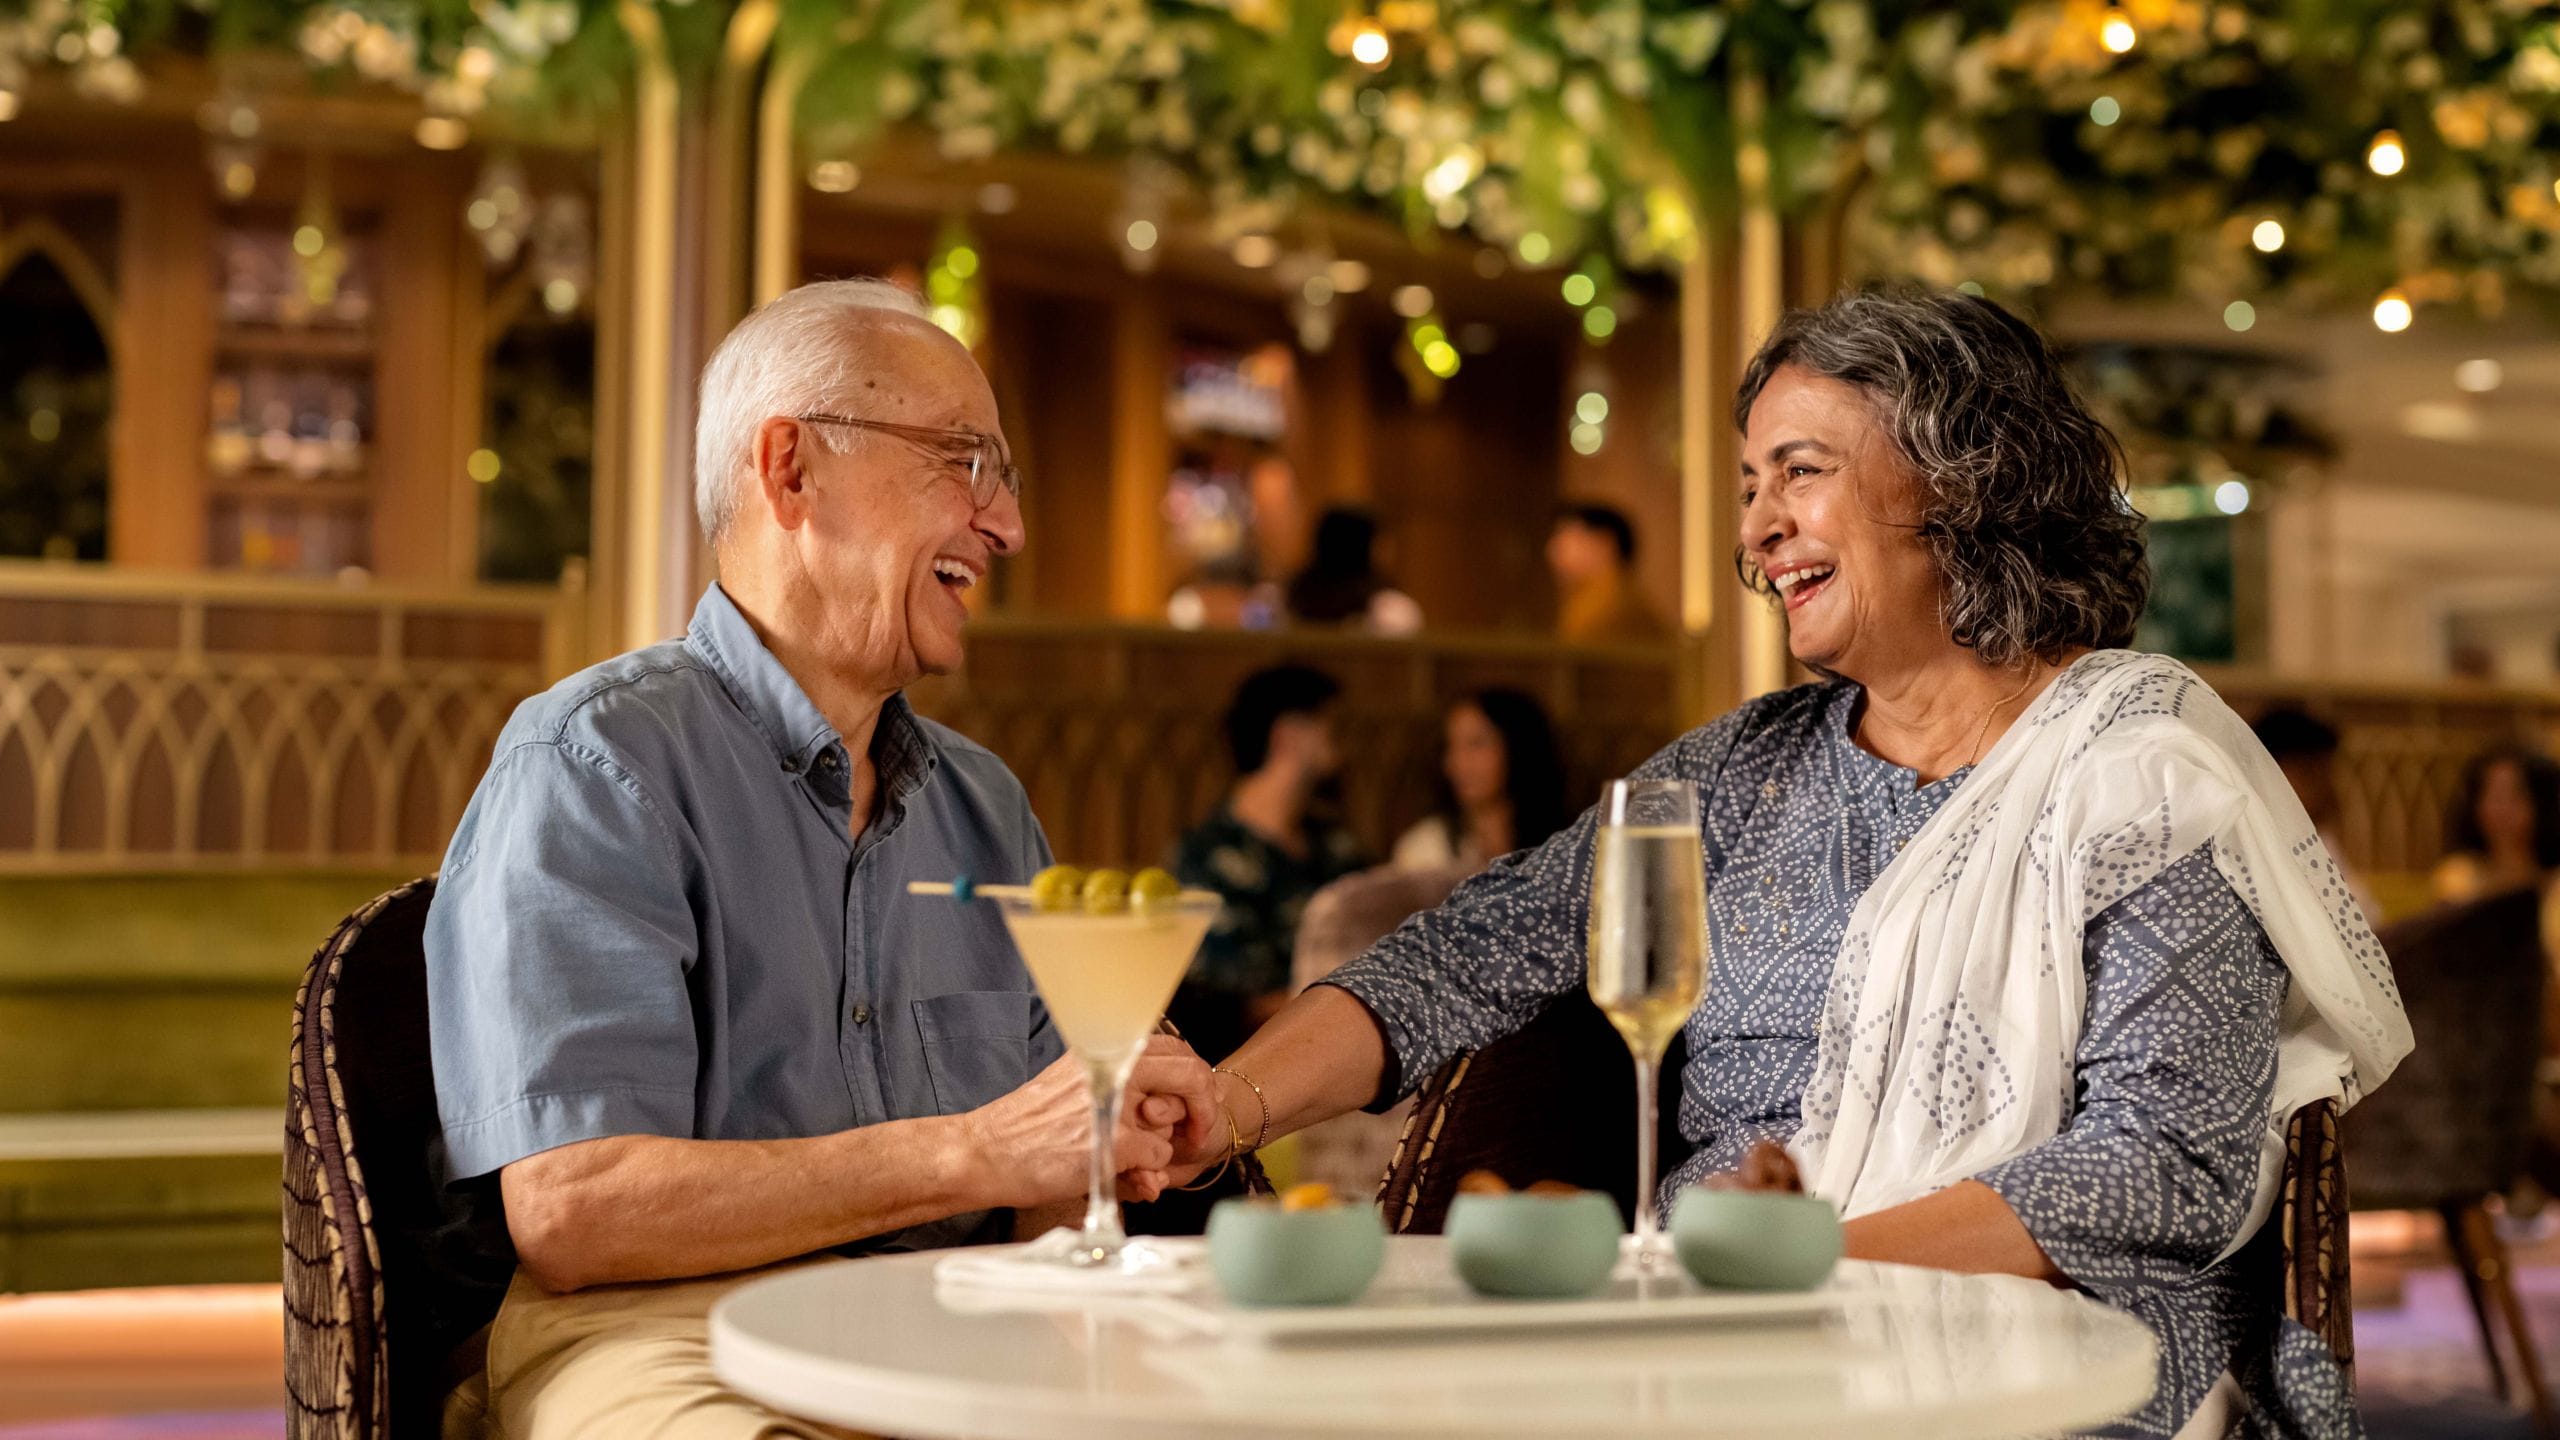 An elderly man and elderly woman holding hands at a dining table with drinks and small dishes of food